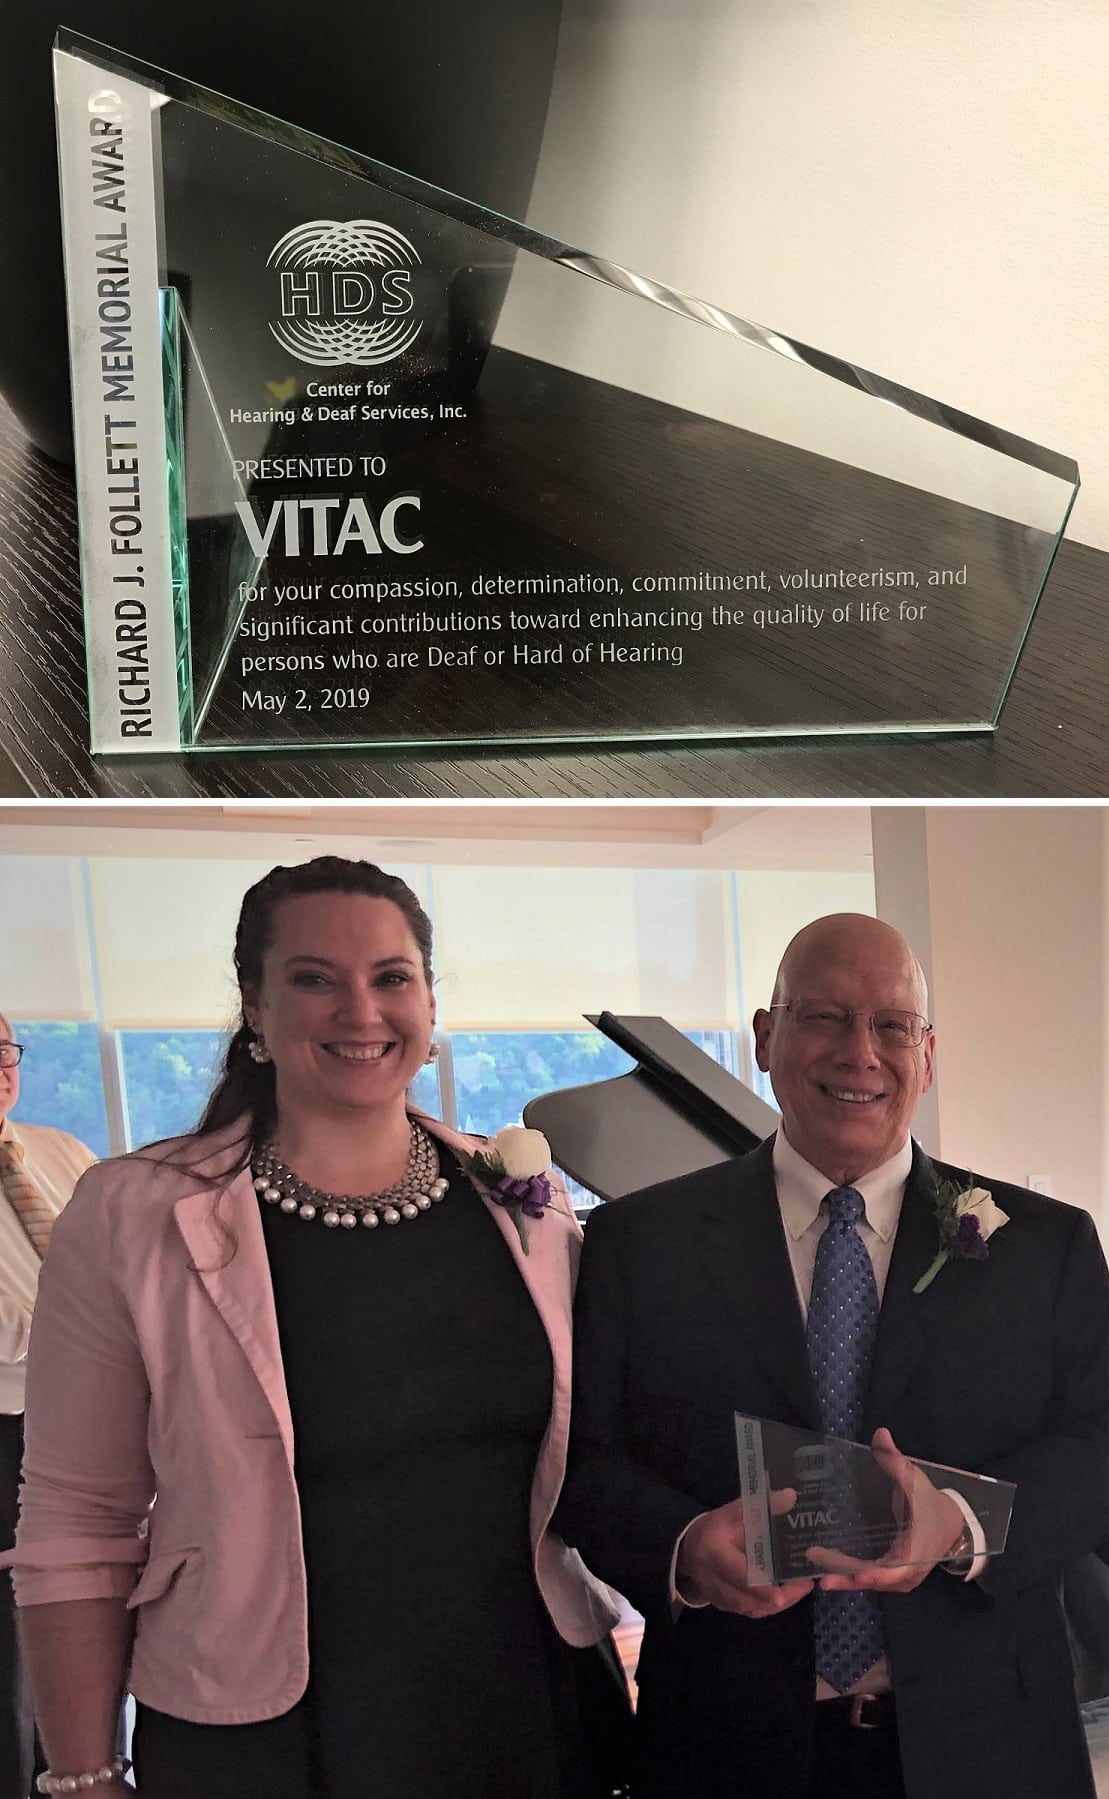 Photo of VITAC's Marketing Director Brittany Winland and CMO John Capobianco and close-up of the Richard Follett Memorial Award.